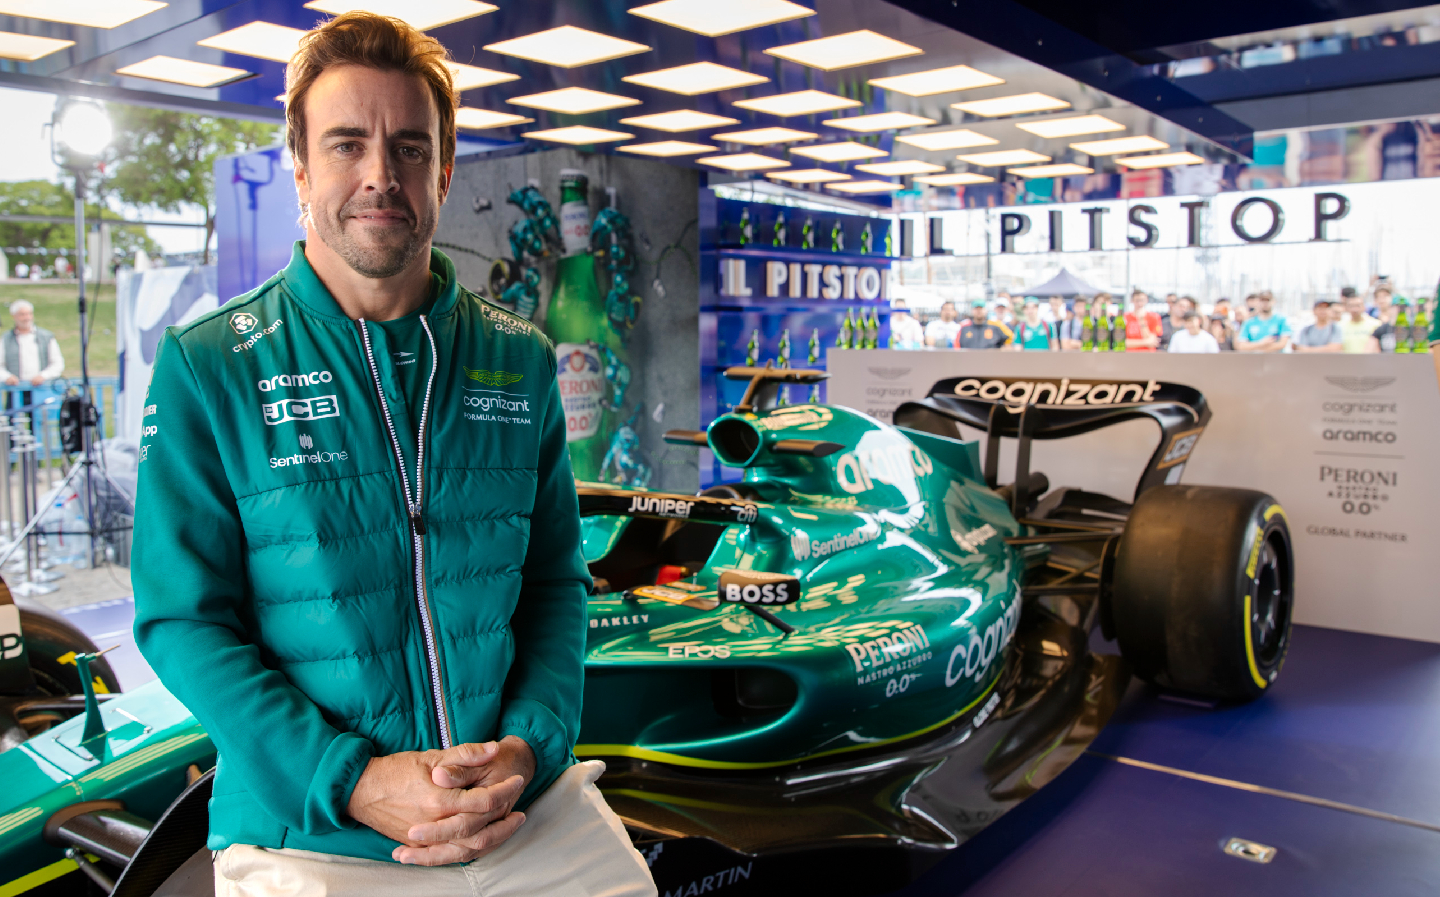 Fernando Alonso on his triumphant F1 return and why he still has